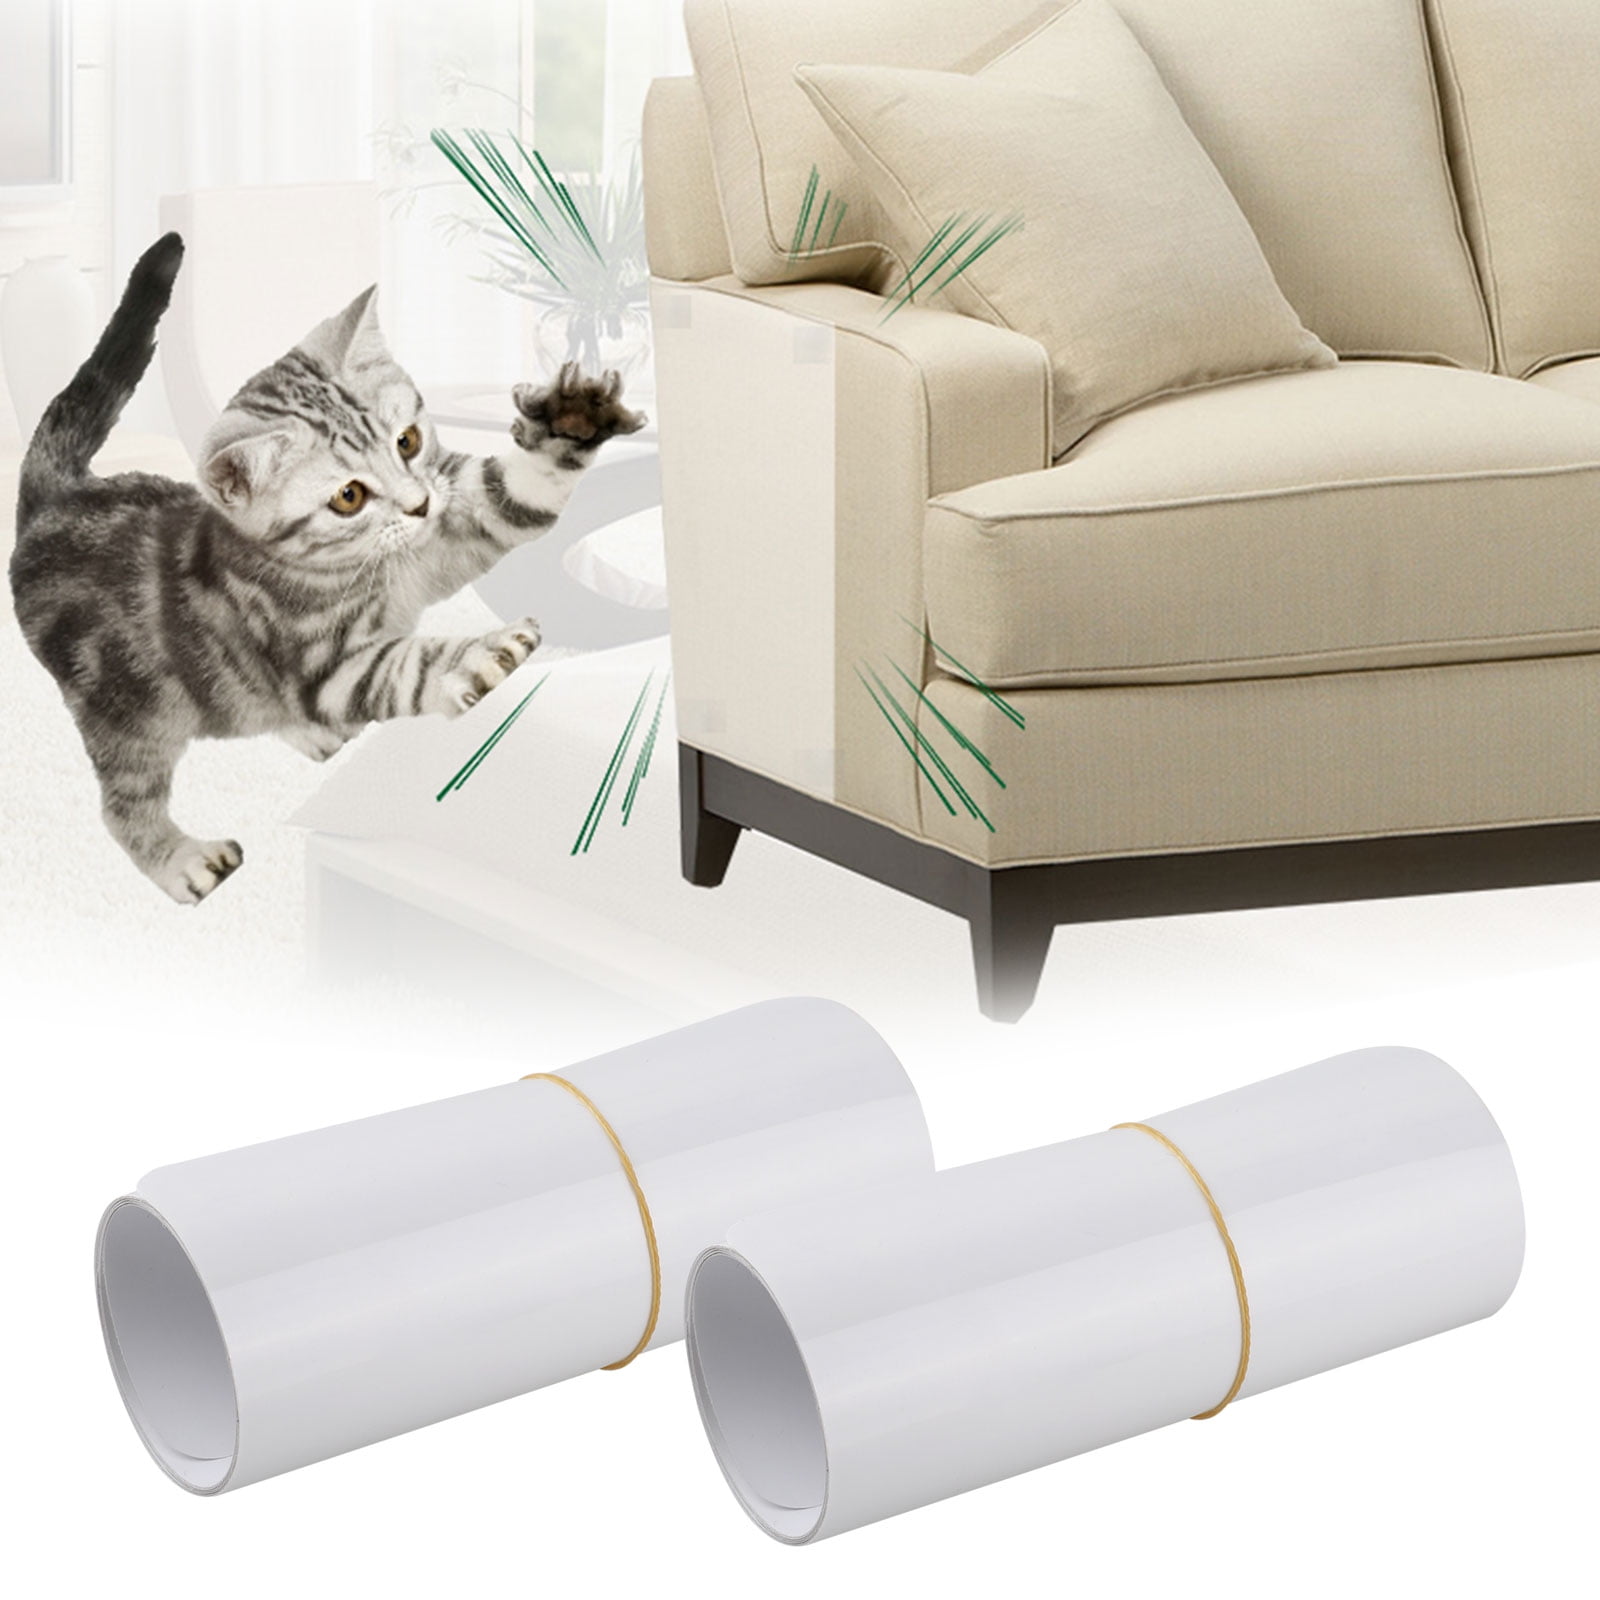 Cat Scratching Couch, How To Stop Cats Scratching Dining Chairs